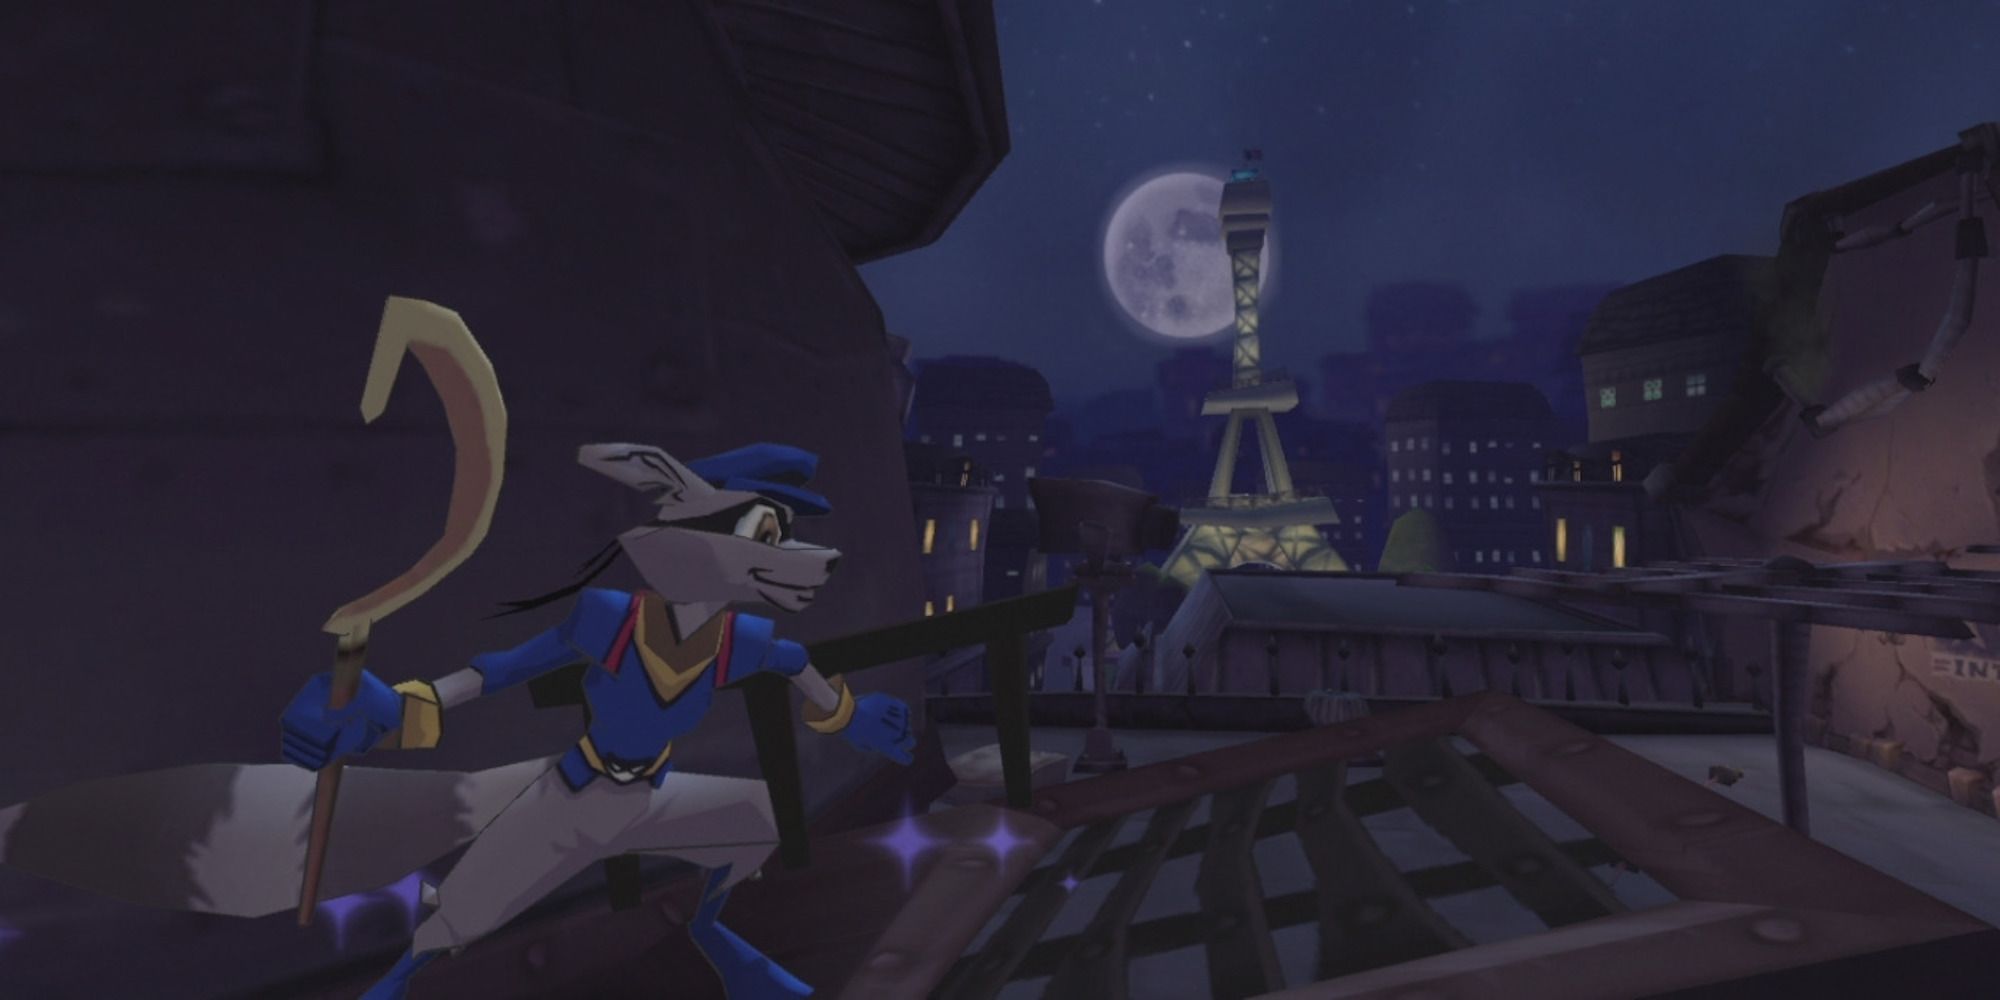 Sly Cooper from Sly Cooper 